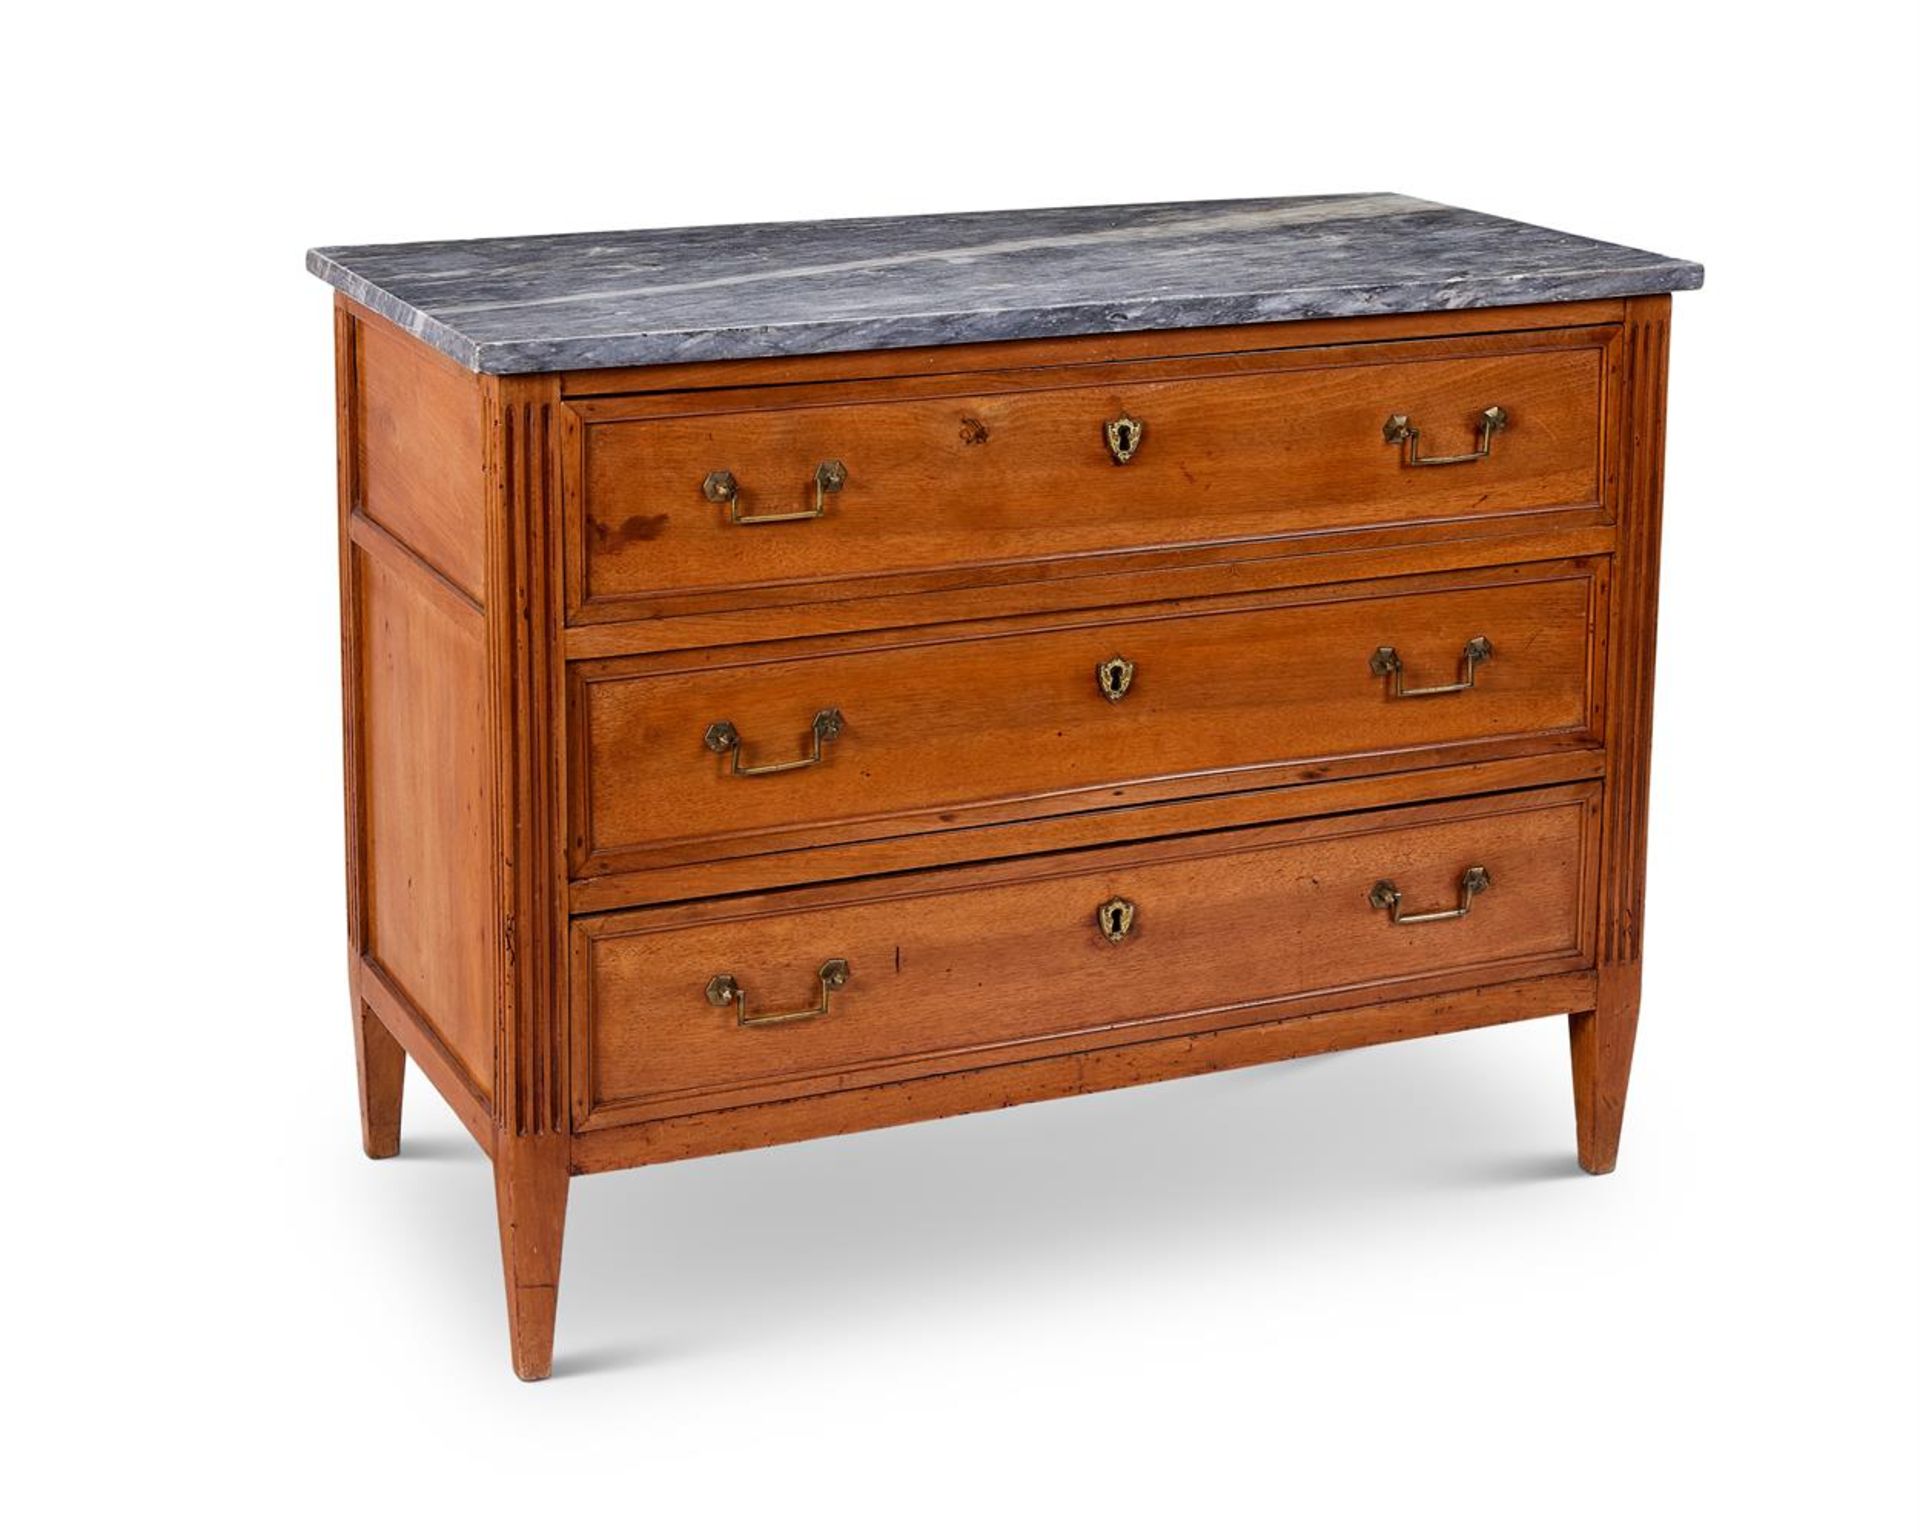 A FRENCH WALNUT COMMODE, 19TH CENTURY